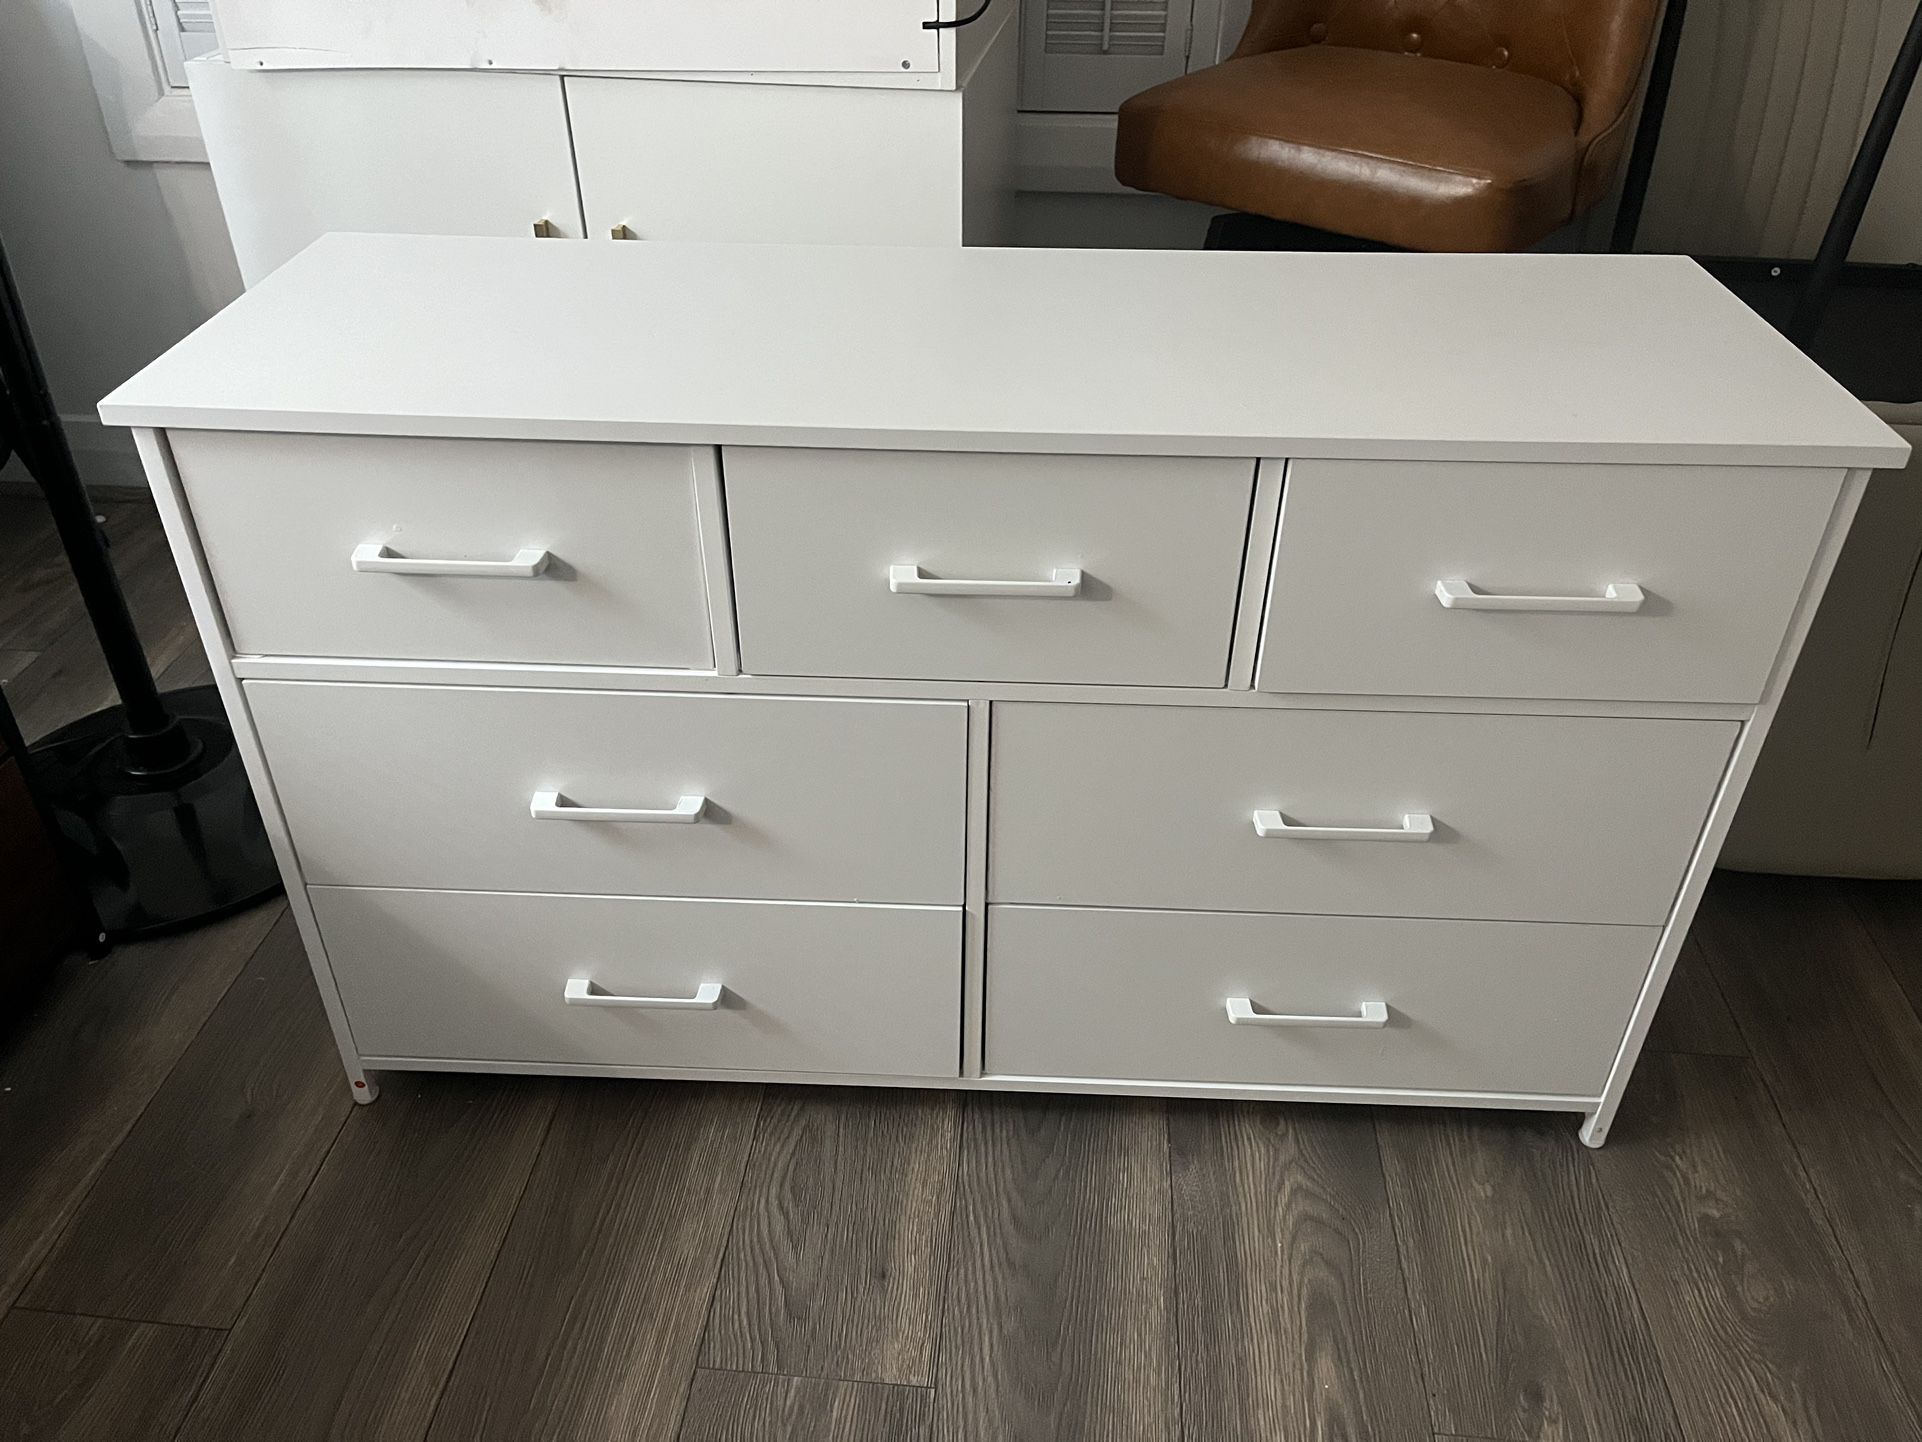 7 Drawer White Dresser, Industrial Wood Storage Dressers & Chests of Drawers with Sturdy Steel Frame, White Dresser for Bedroom,White